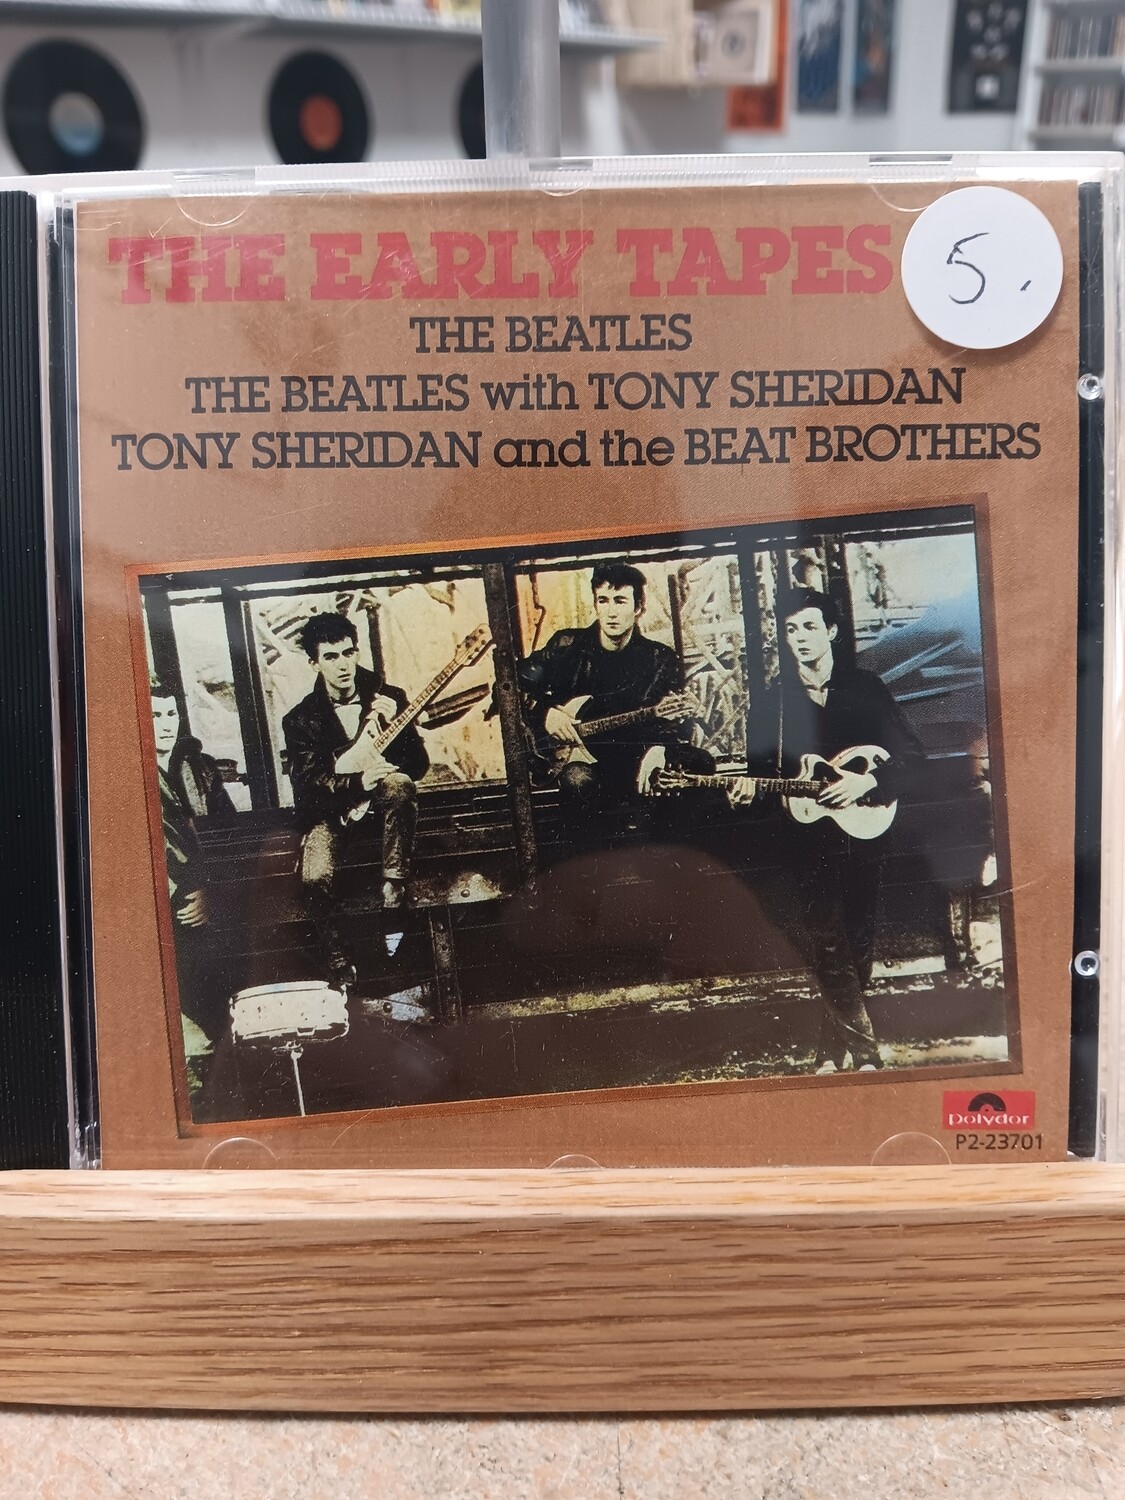 The Beatles - The Early Tapes (CD)